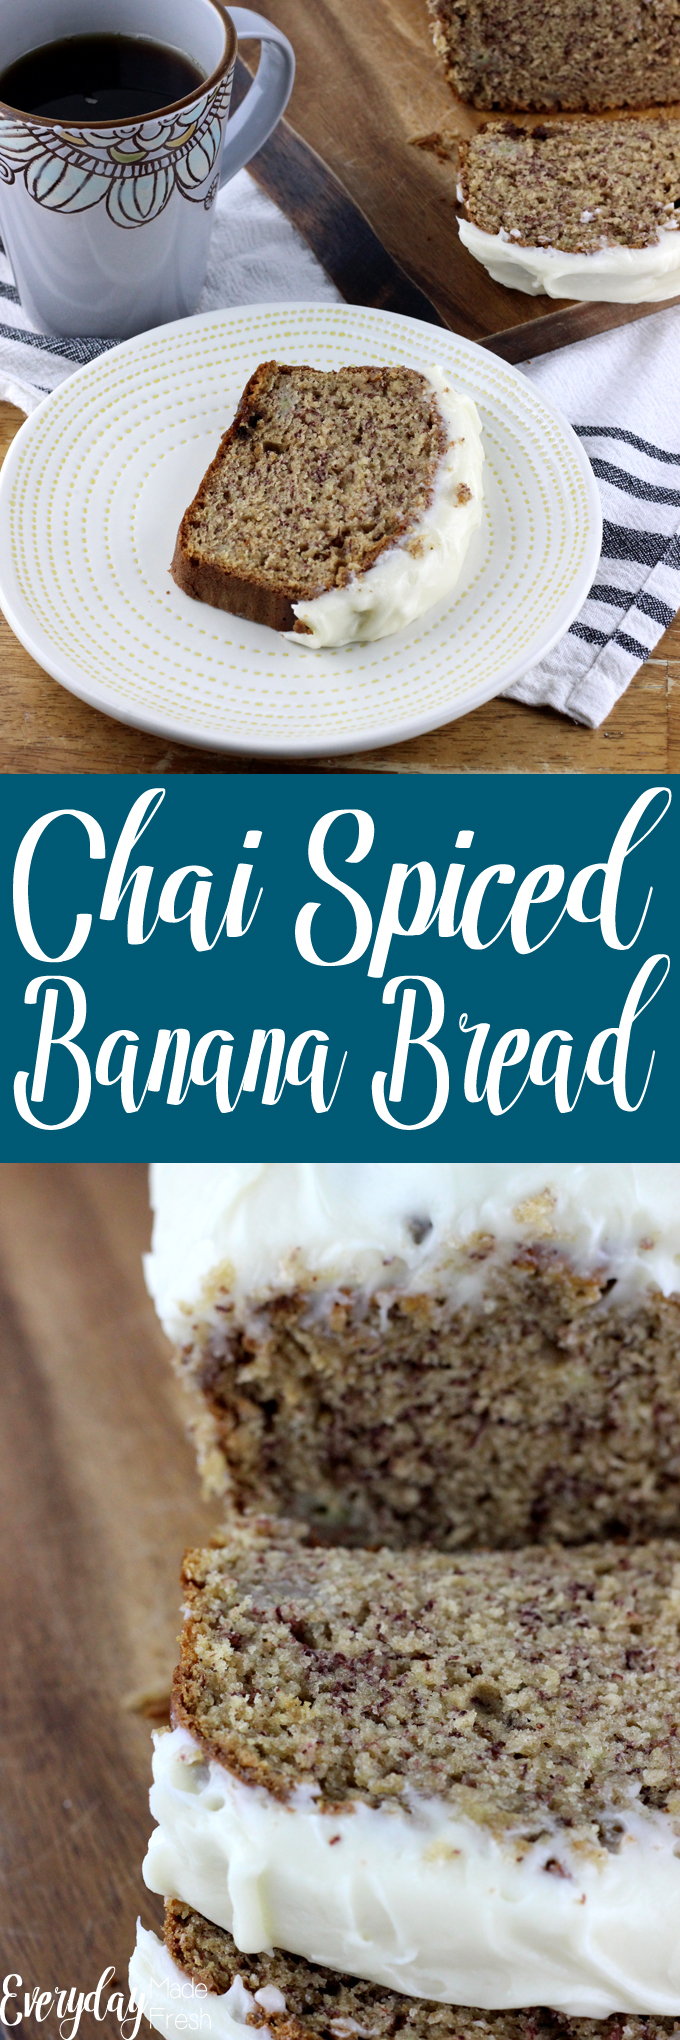 This Chai Spiced Banana Bread is perfect for breakfast, afternoon snacking, or just when you feel like it! Banana bread just got a fall makeover with the addition of warm spices and a perfect ribbon of cream cheese spread on top. | EverydayMadeFresh.com